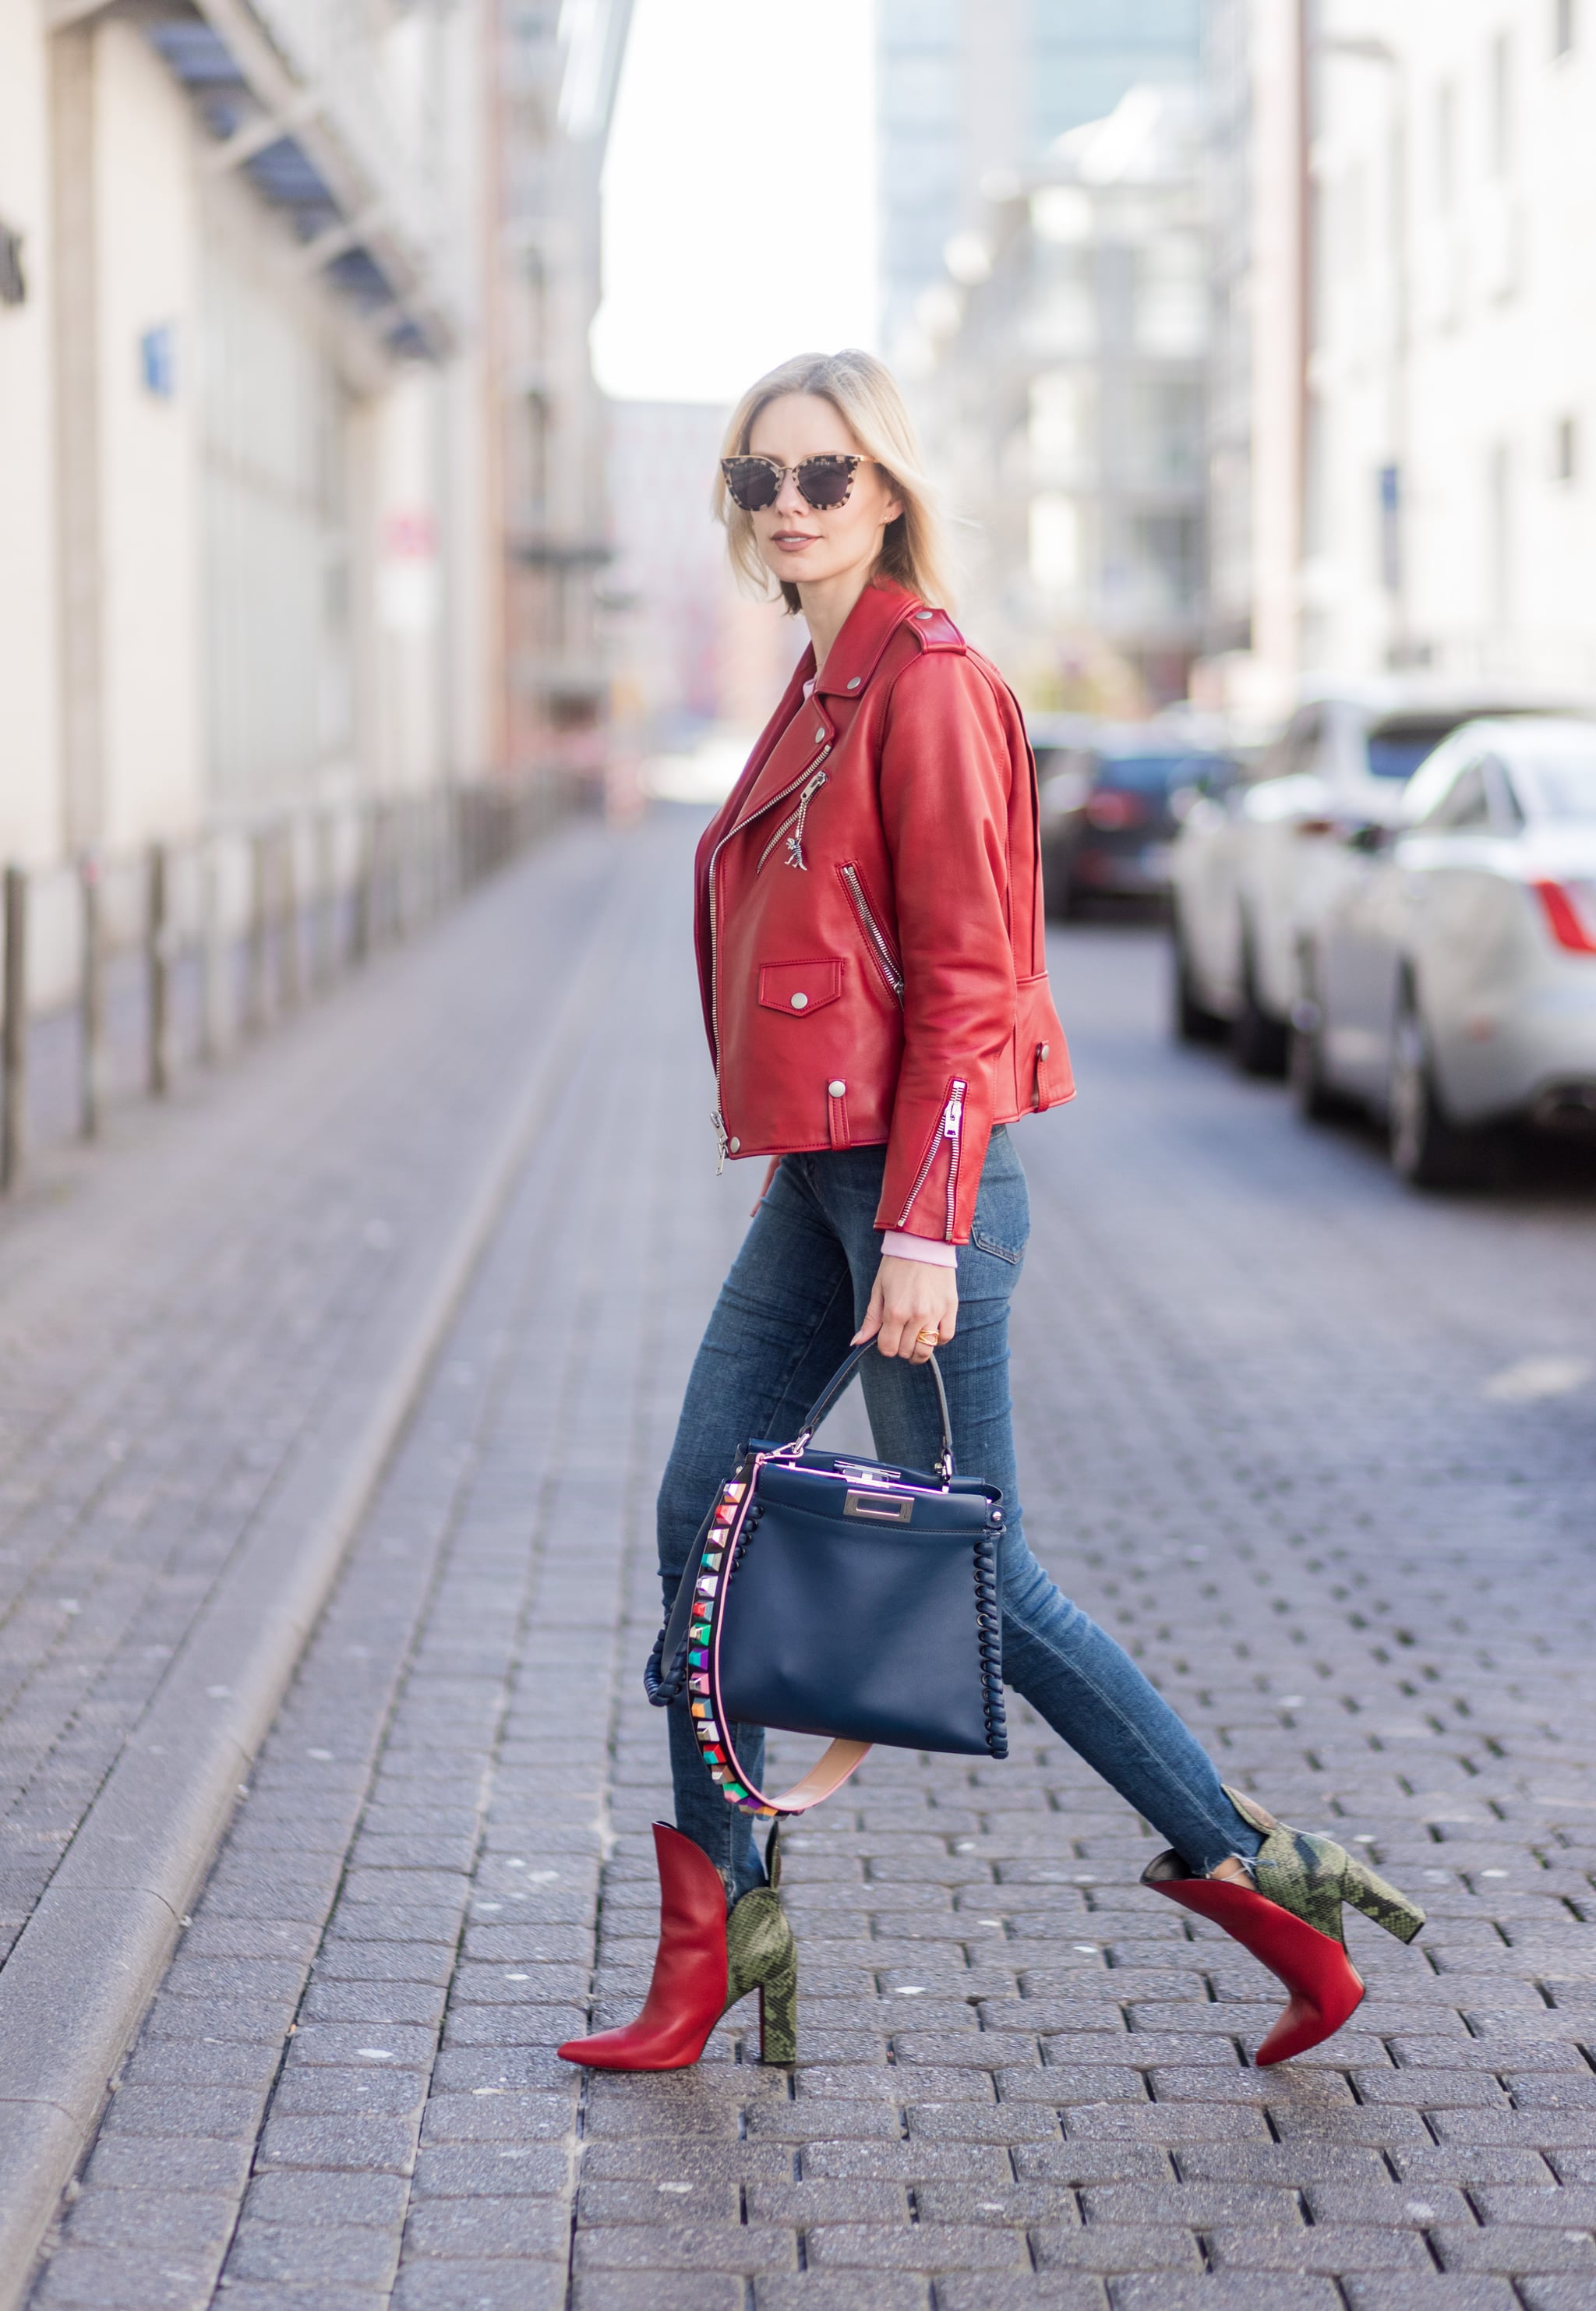 Skinny Jeans, a Red Leather Jacket, and Bold Ankle Boots | Outfit Ideas That You'll Love Wearing This Fall | POPSUGAR Fashion 20